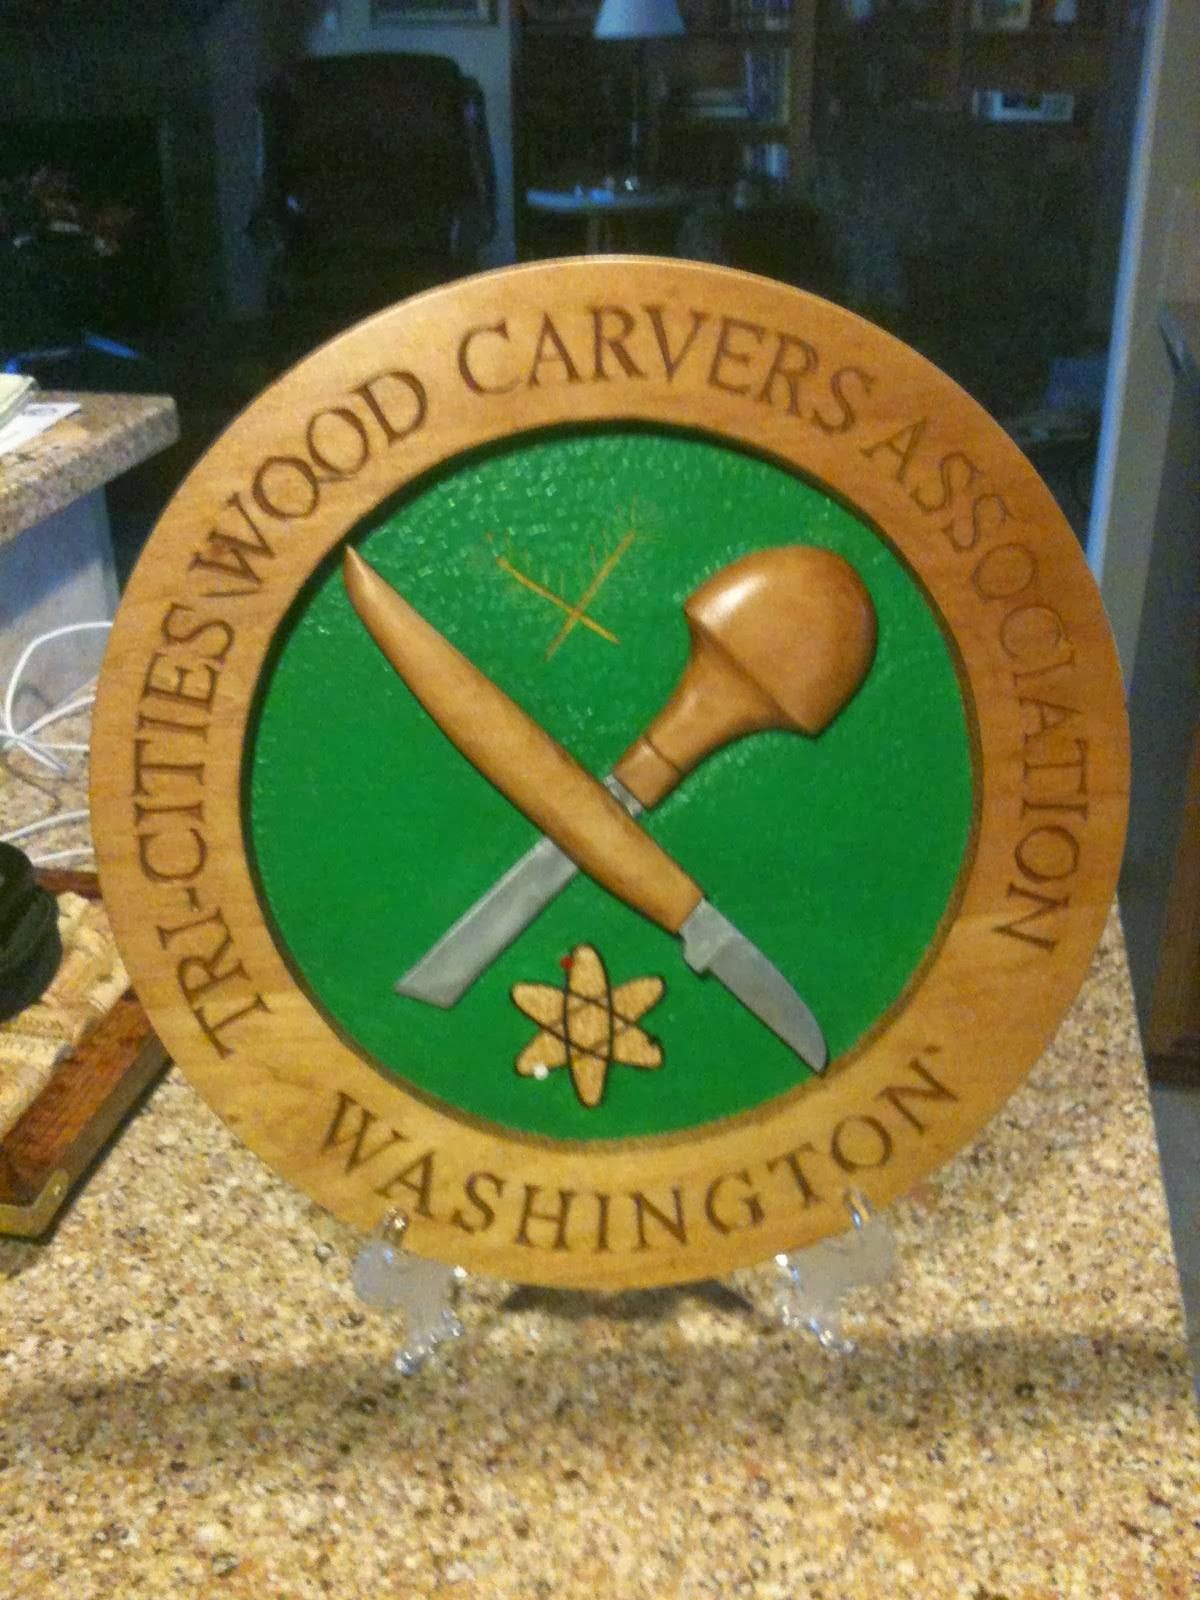 Tri-Cities Wood Carvers - Artistry In Wood Show In Kennewick, WA